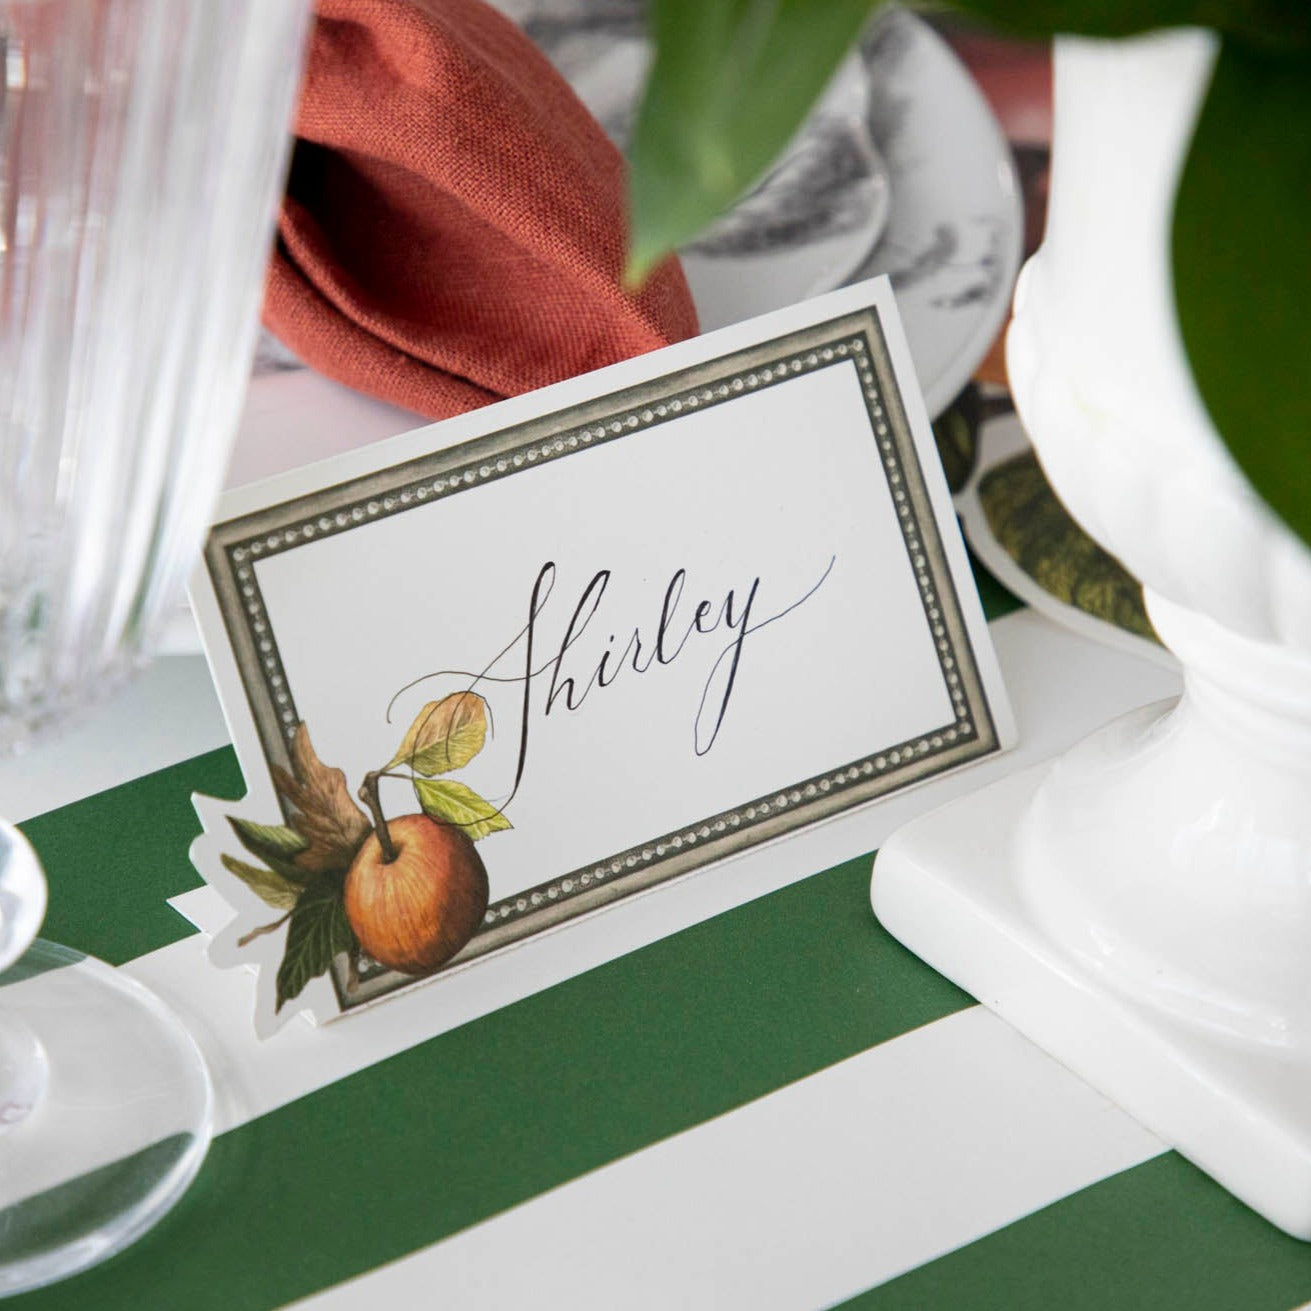 Close-up of a Heirloom Apples Place Card labeled &quot;Shirley&quot; as part of an elegant table setting.